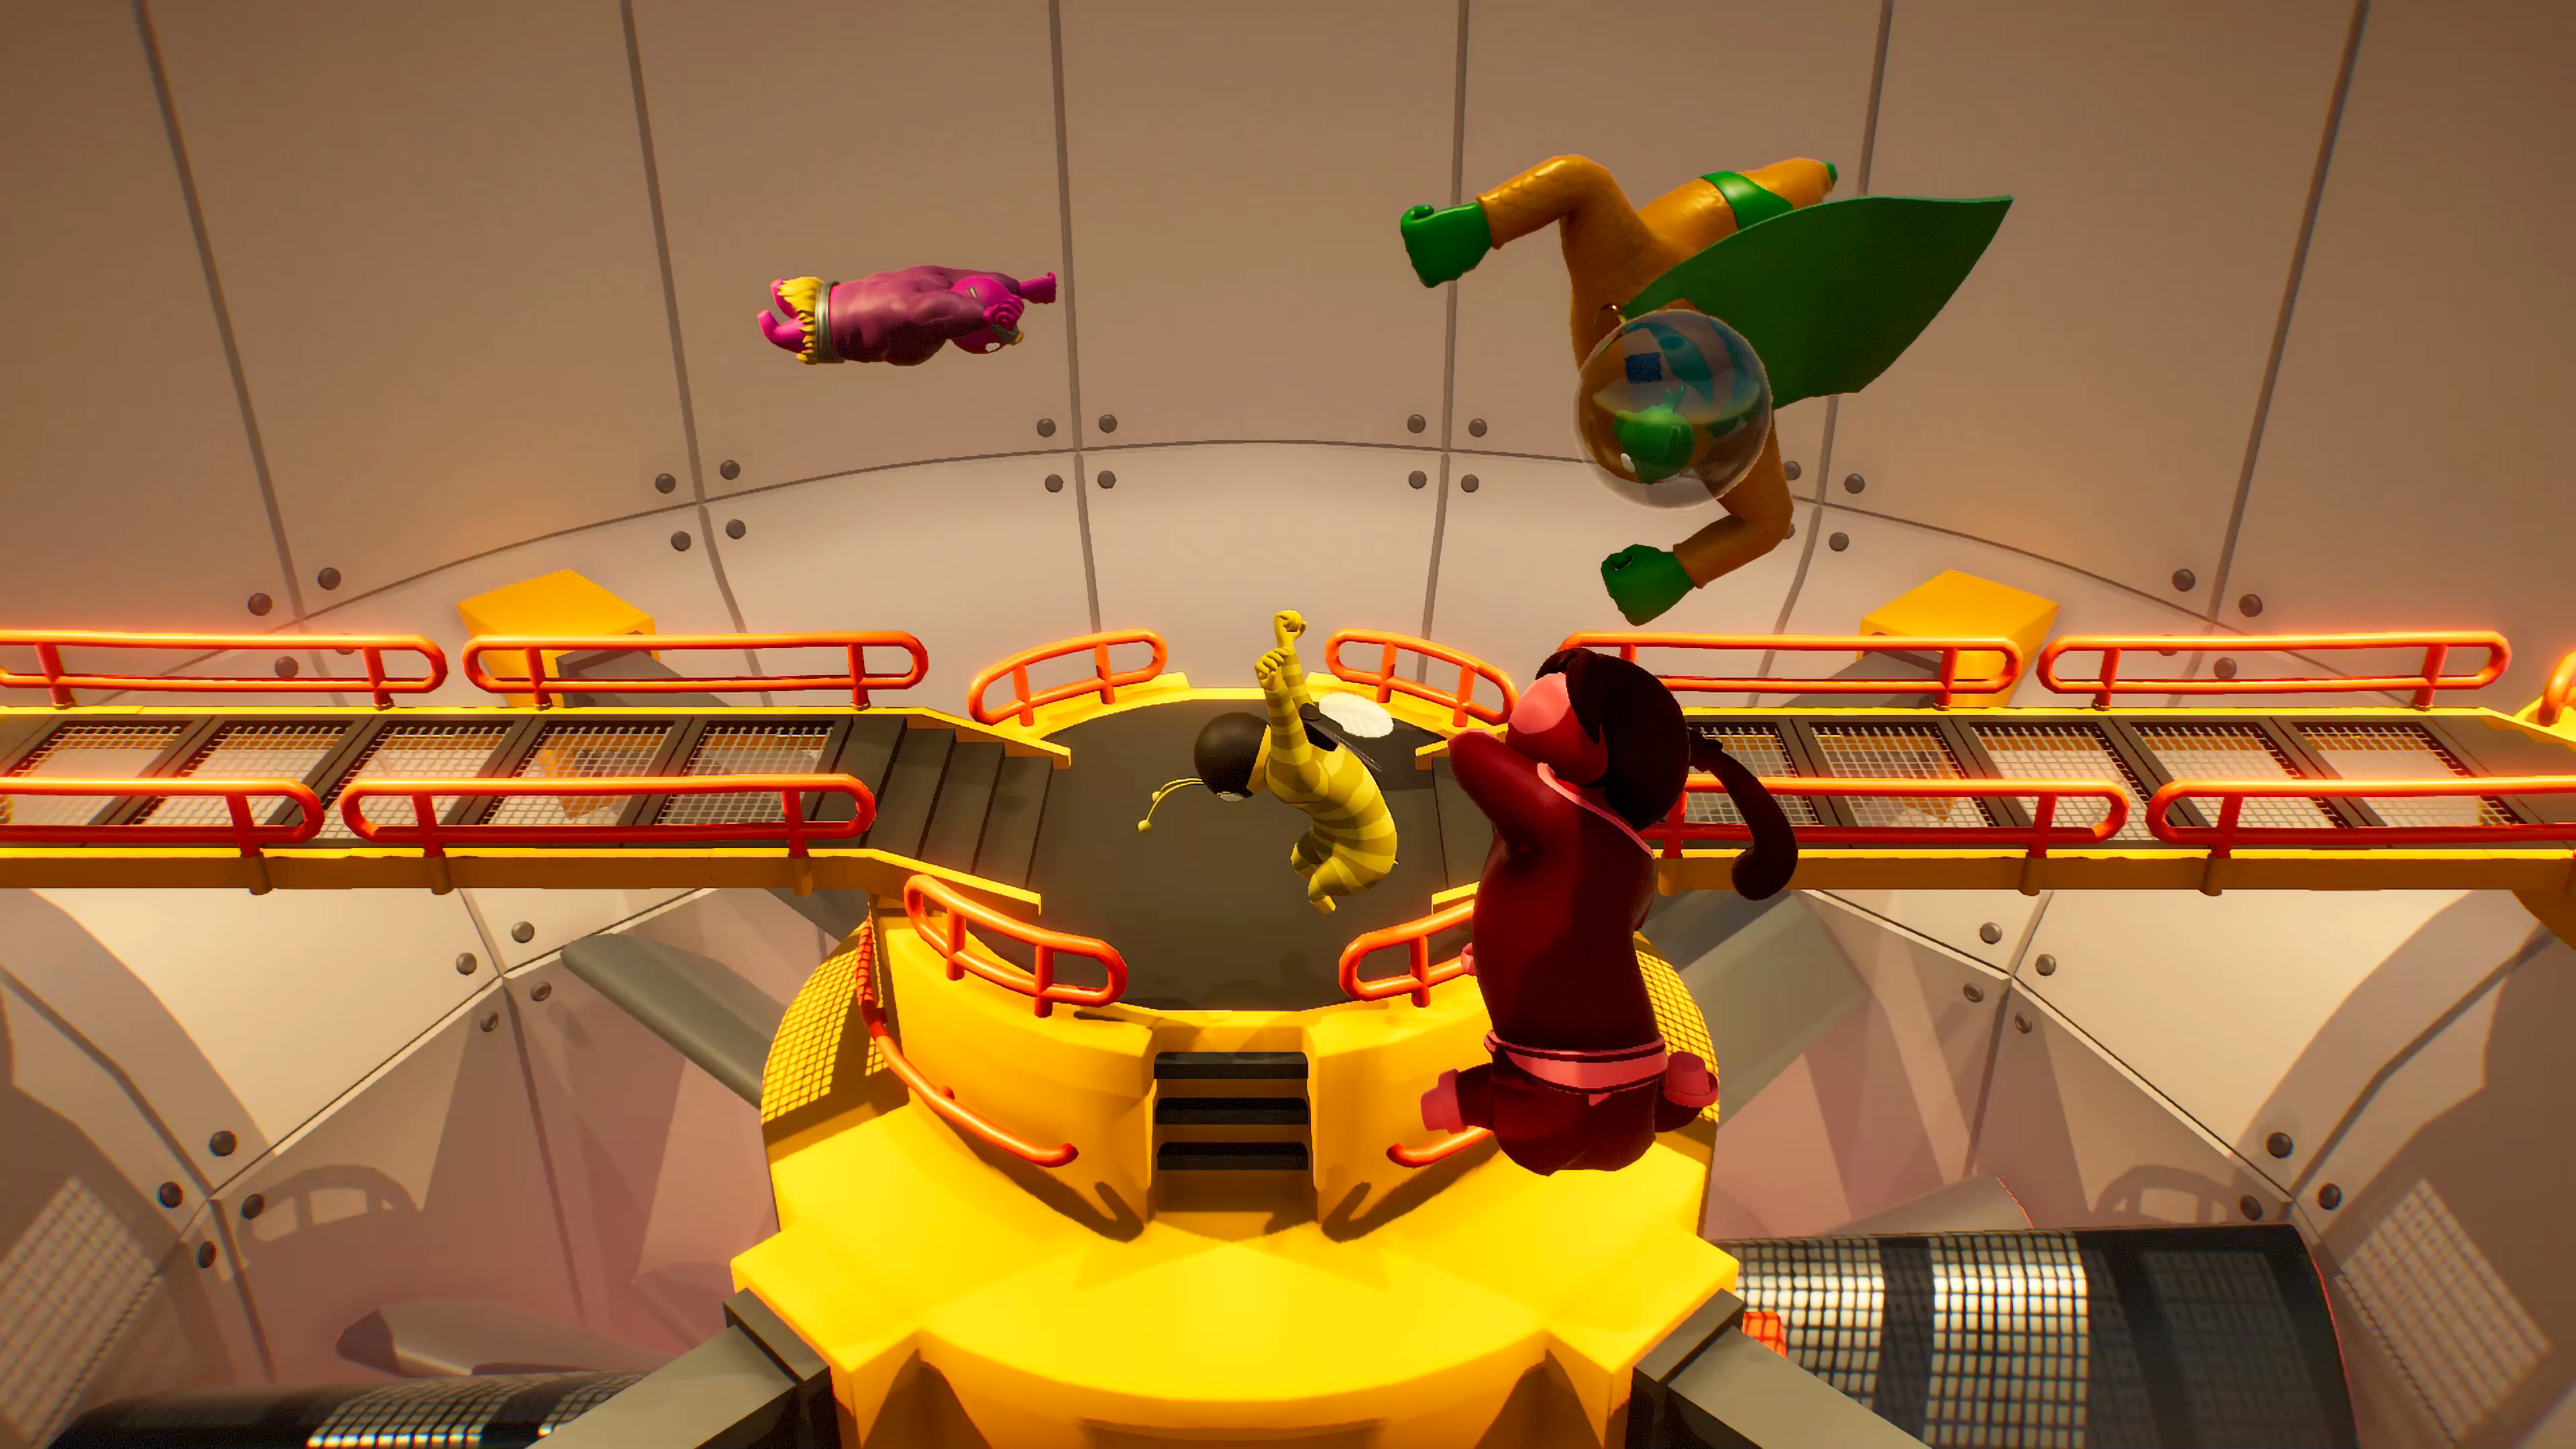 download free gang beasts steam